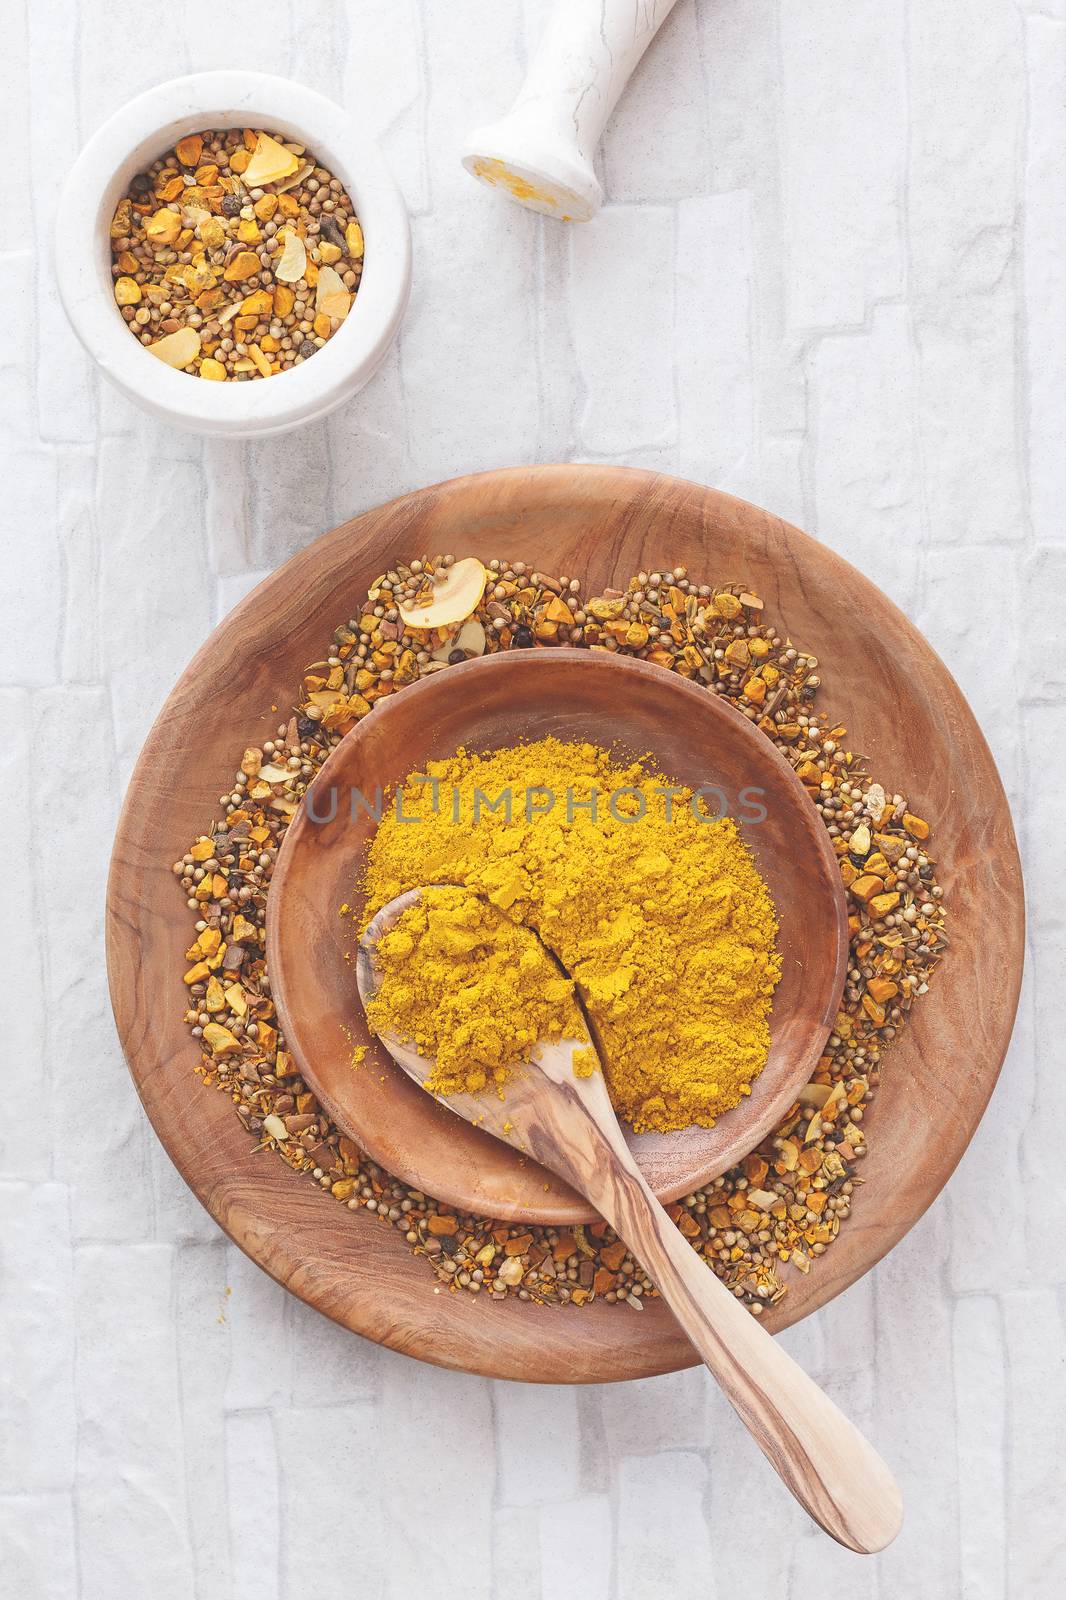 Curry spices in a shallow bowl with a spoon. Top view, blank space, vintage toned image. Natural light